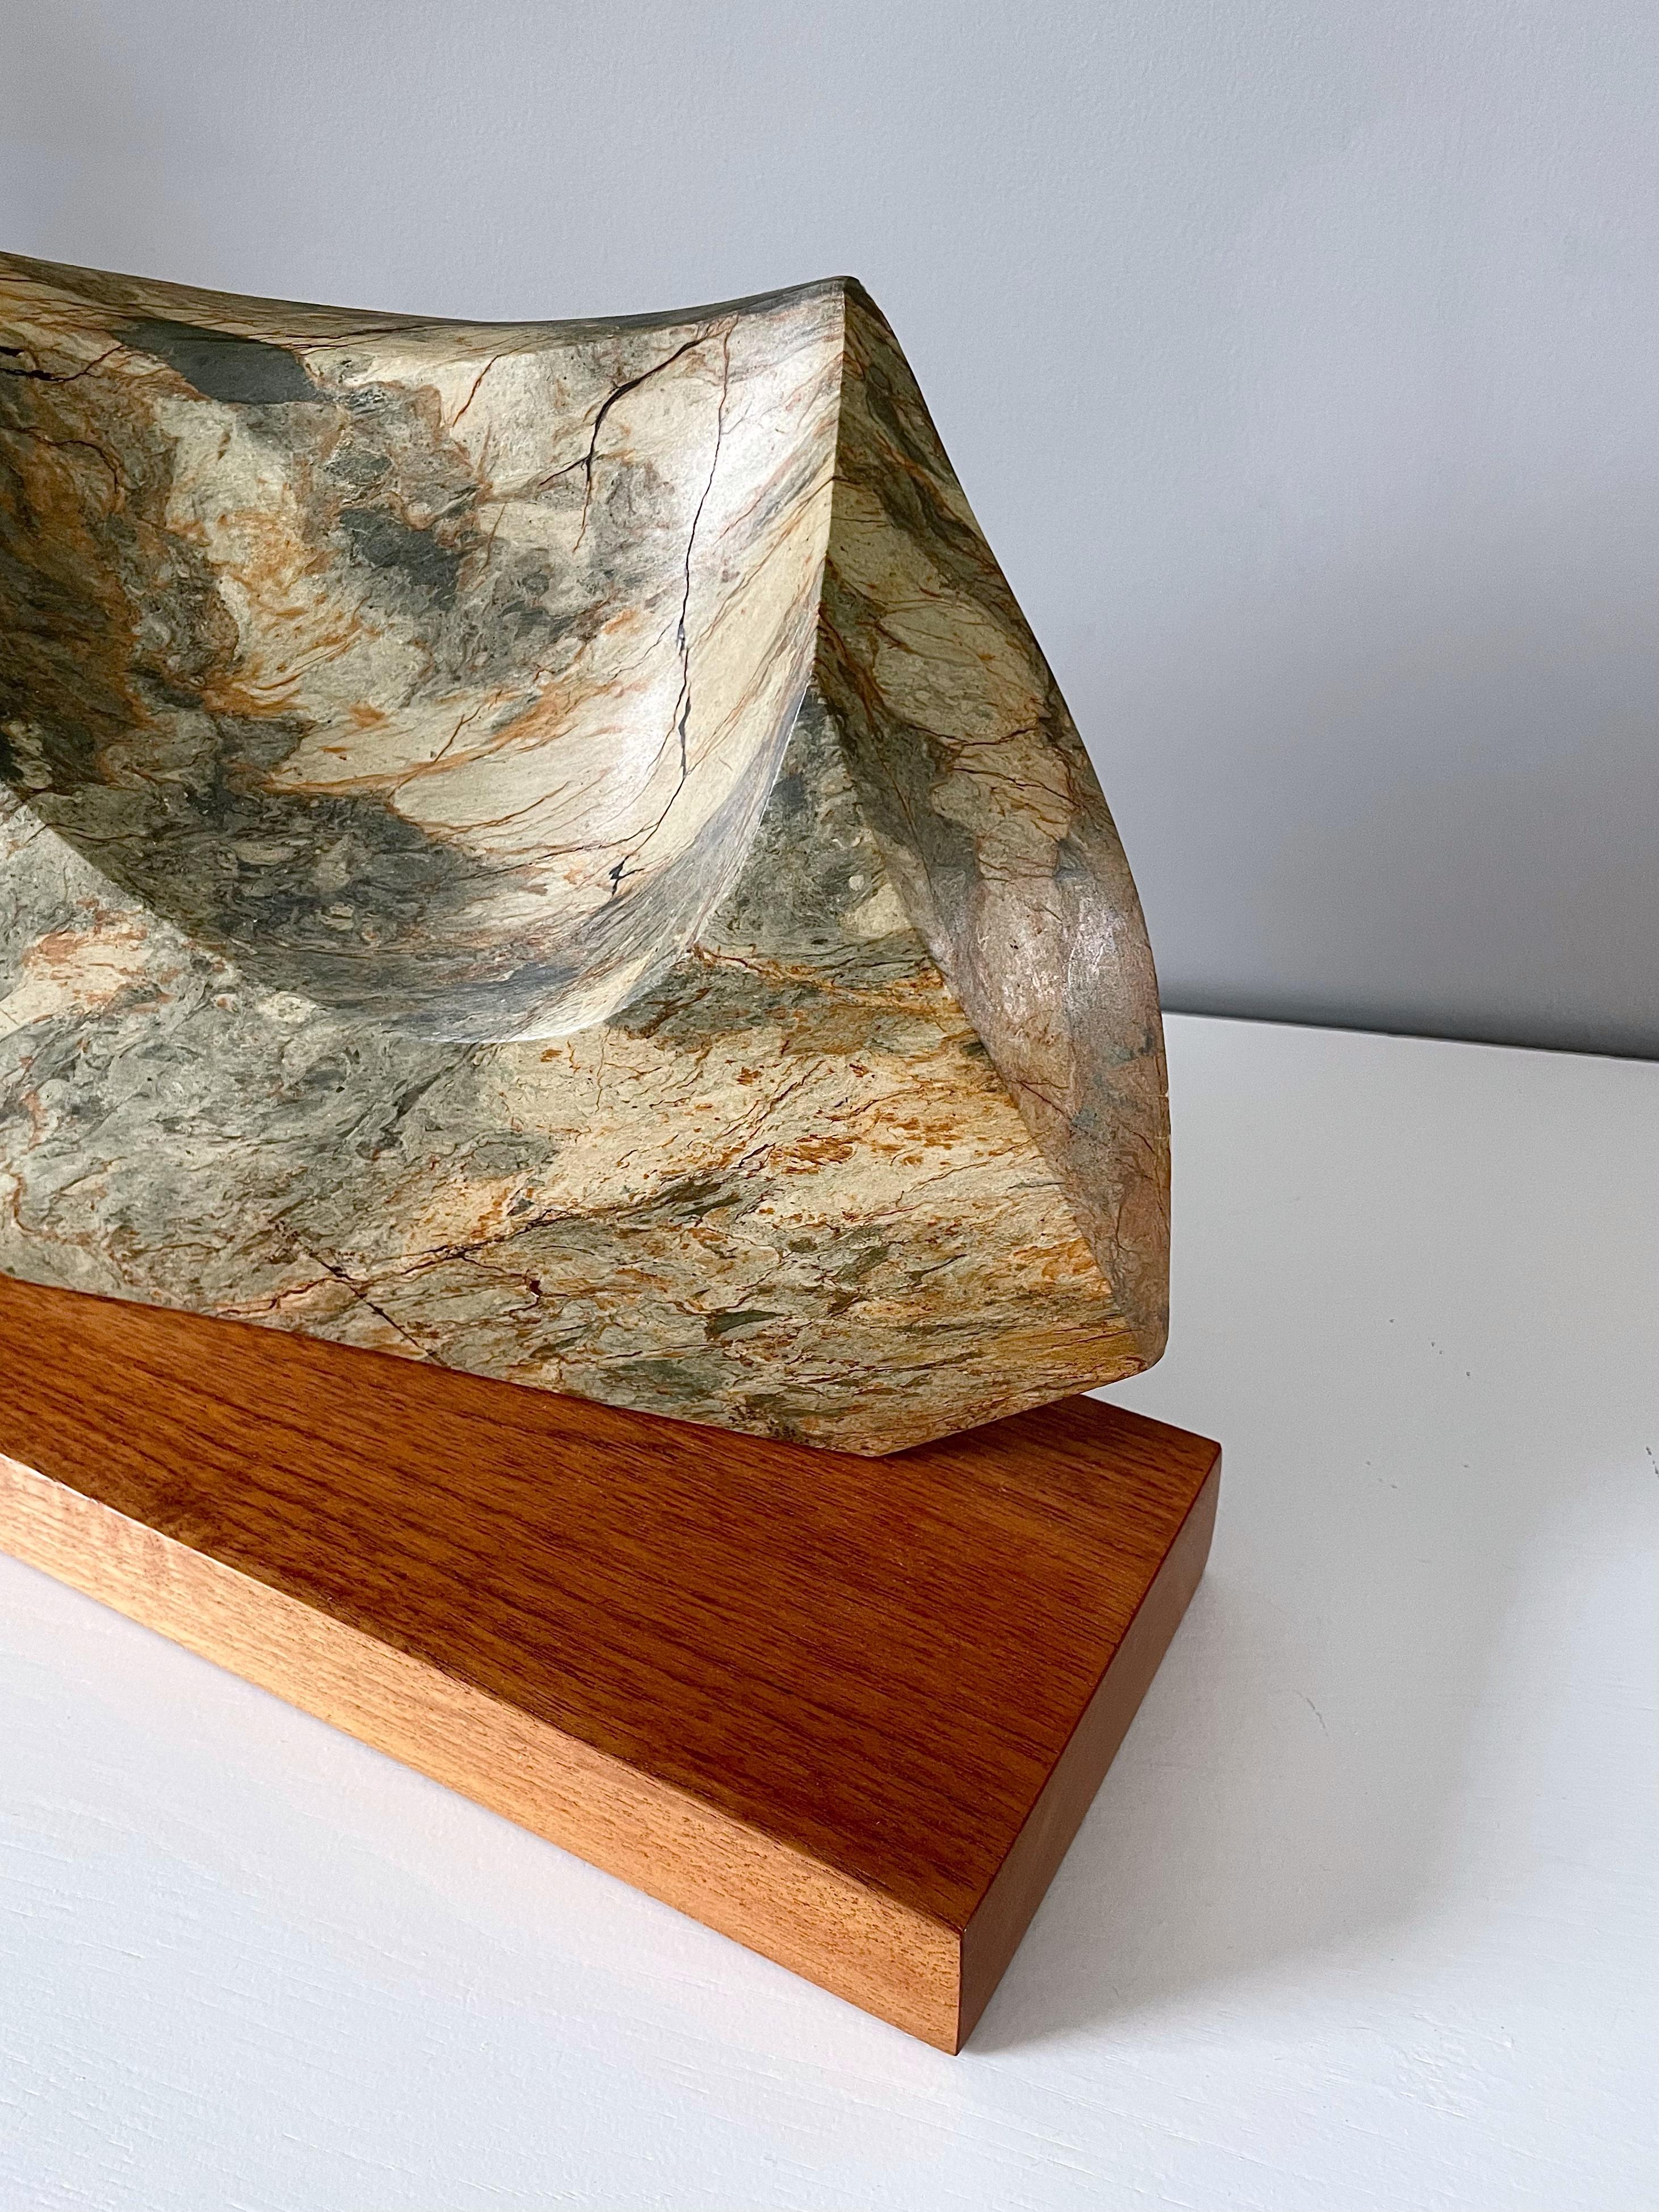 American Modernist Abstract Sculpture, Green Marble, Teak, 1970s For Sale